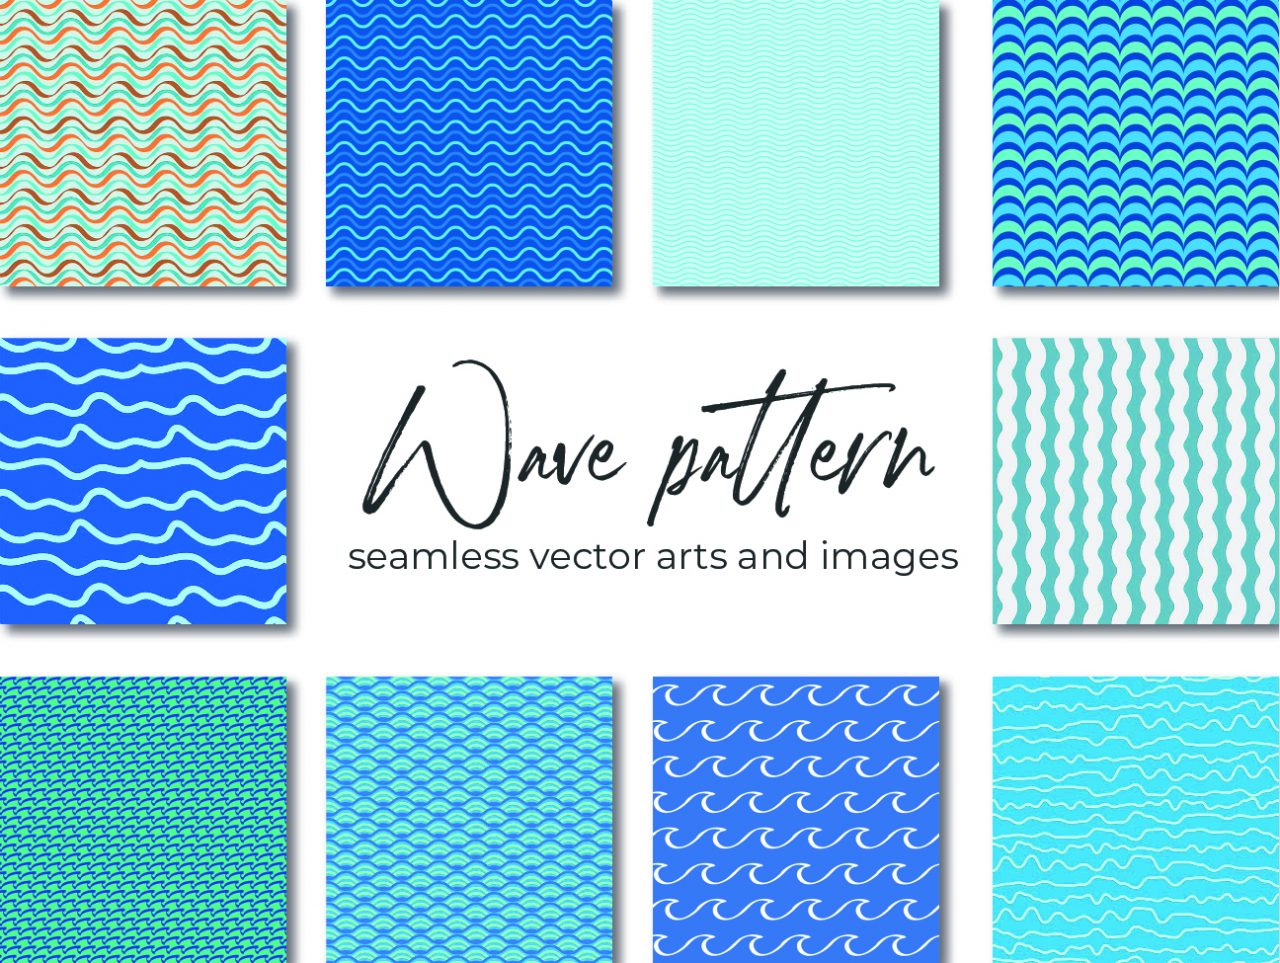 Wave Pattern Vector Graphics Illustrations And Images Wowpatterns Blog